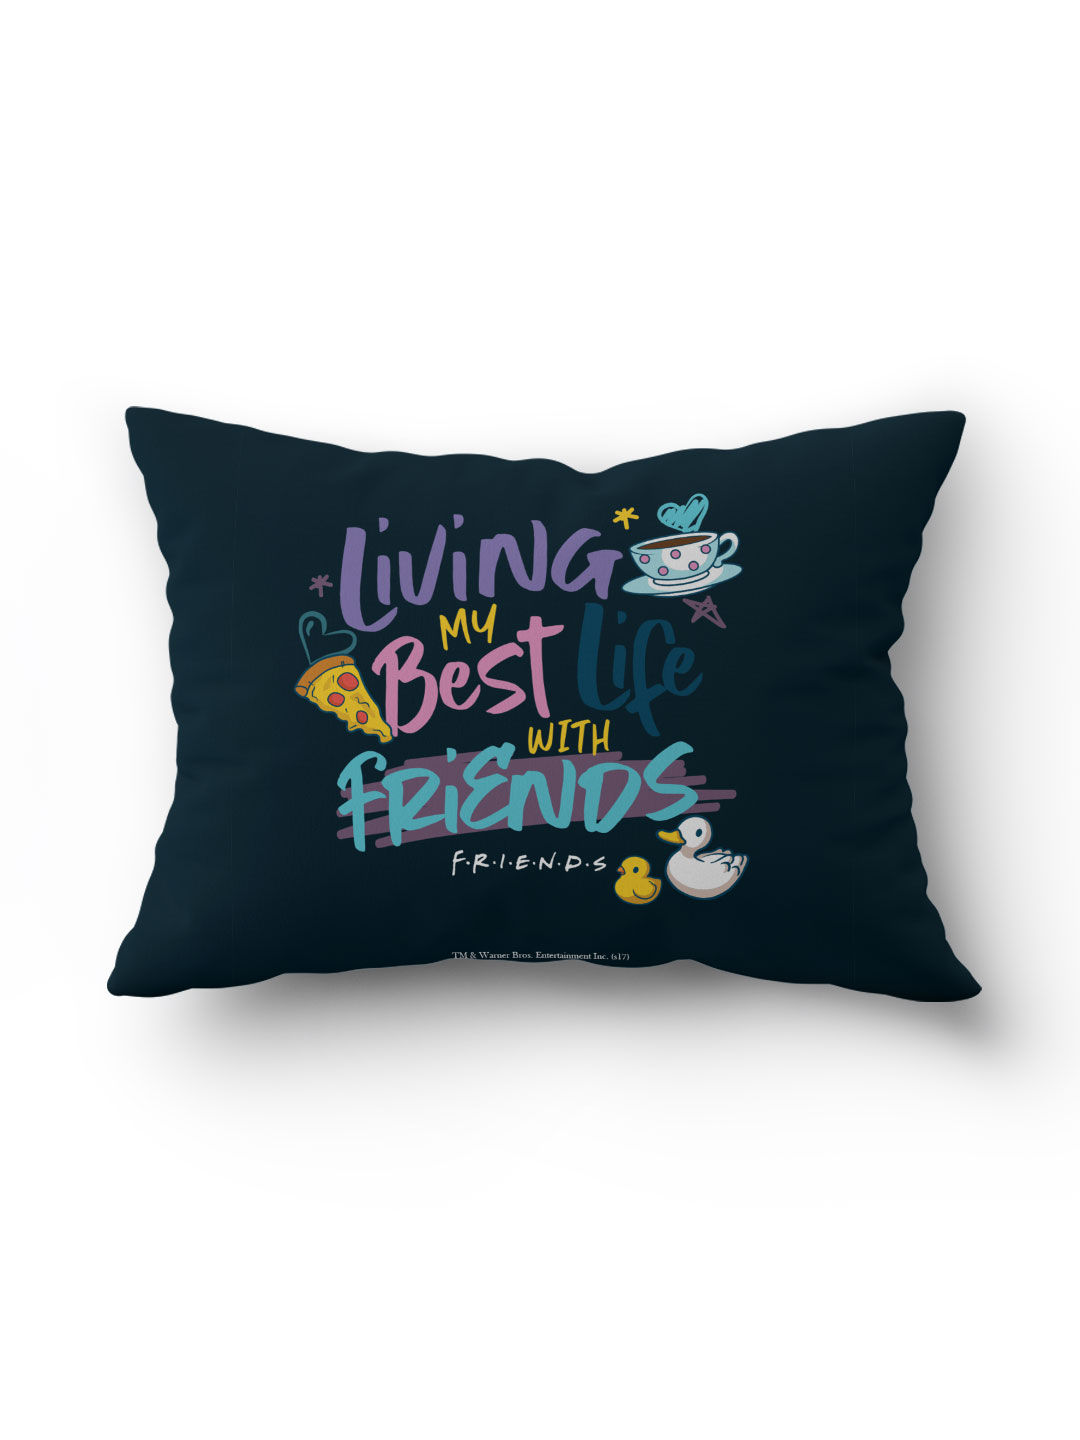 Buy Valentine Best Life with Friends - Rectangle Pillow Pillow Online